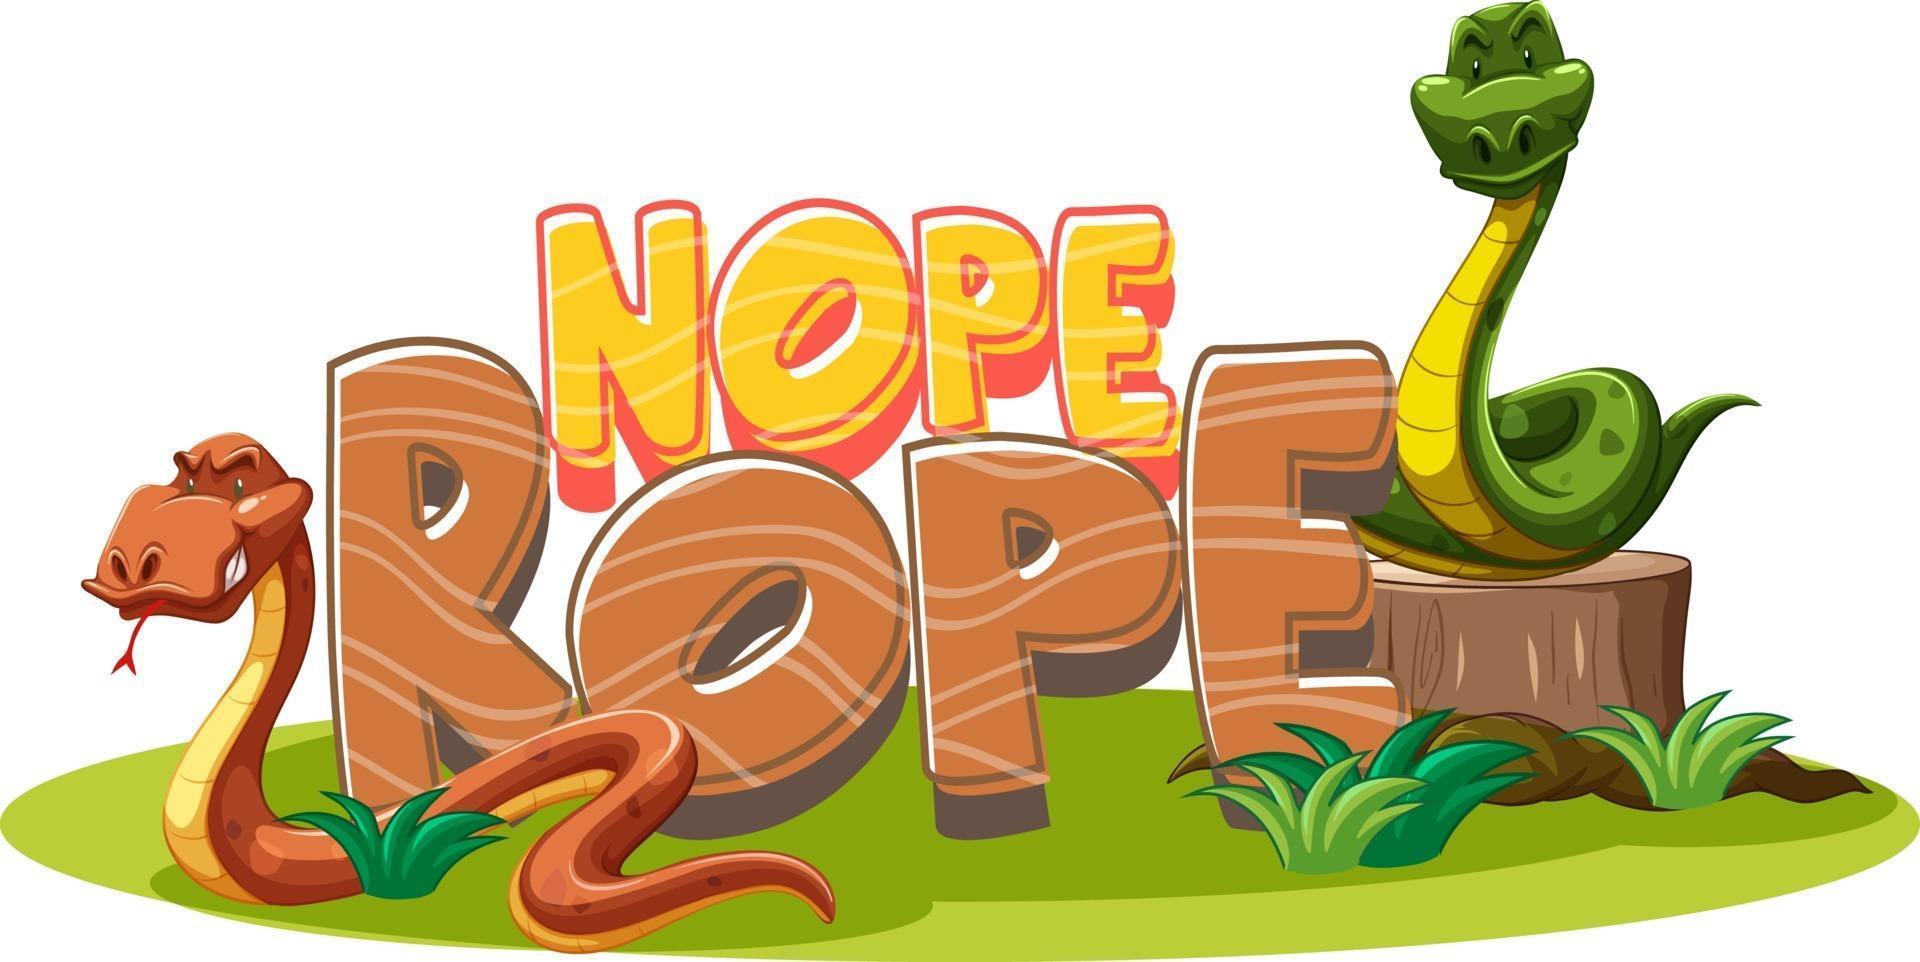 Nope Rope font banner with snake cartoon character isolated vector